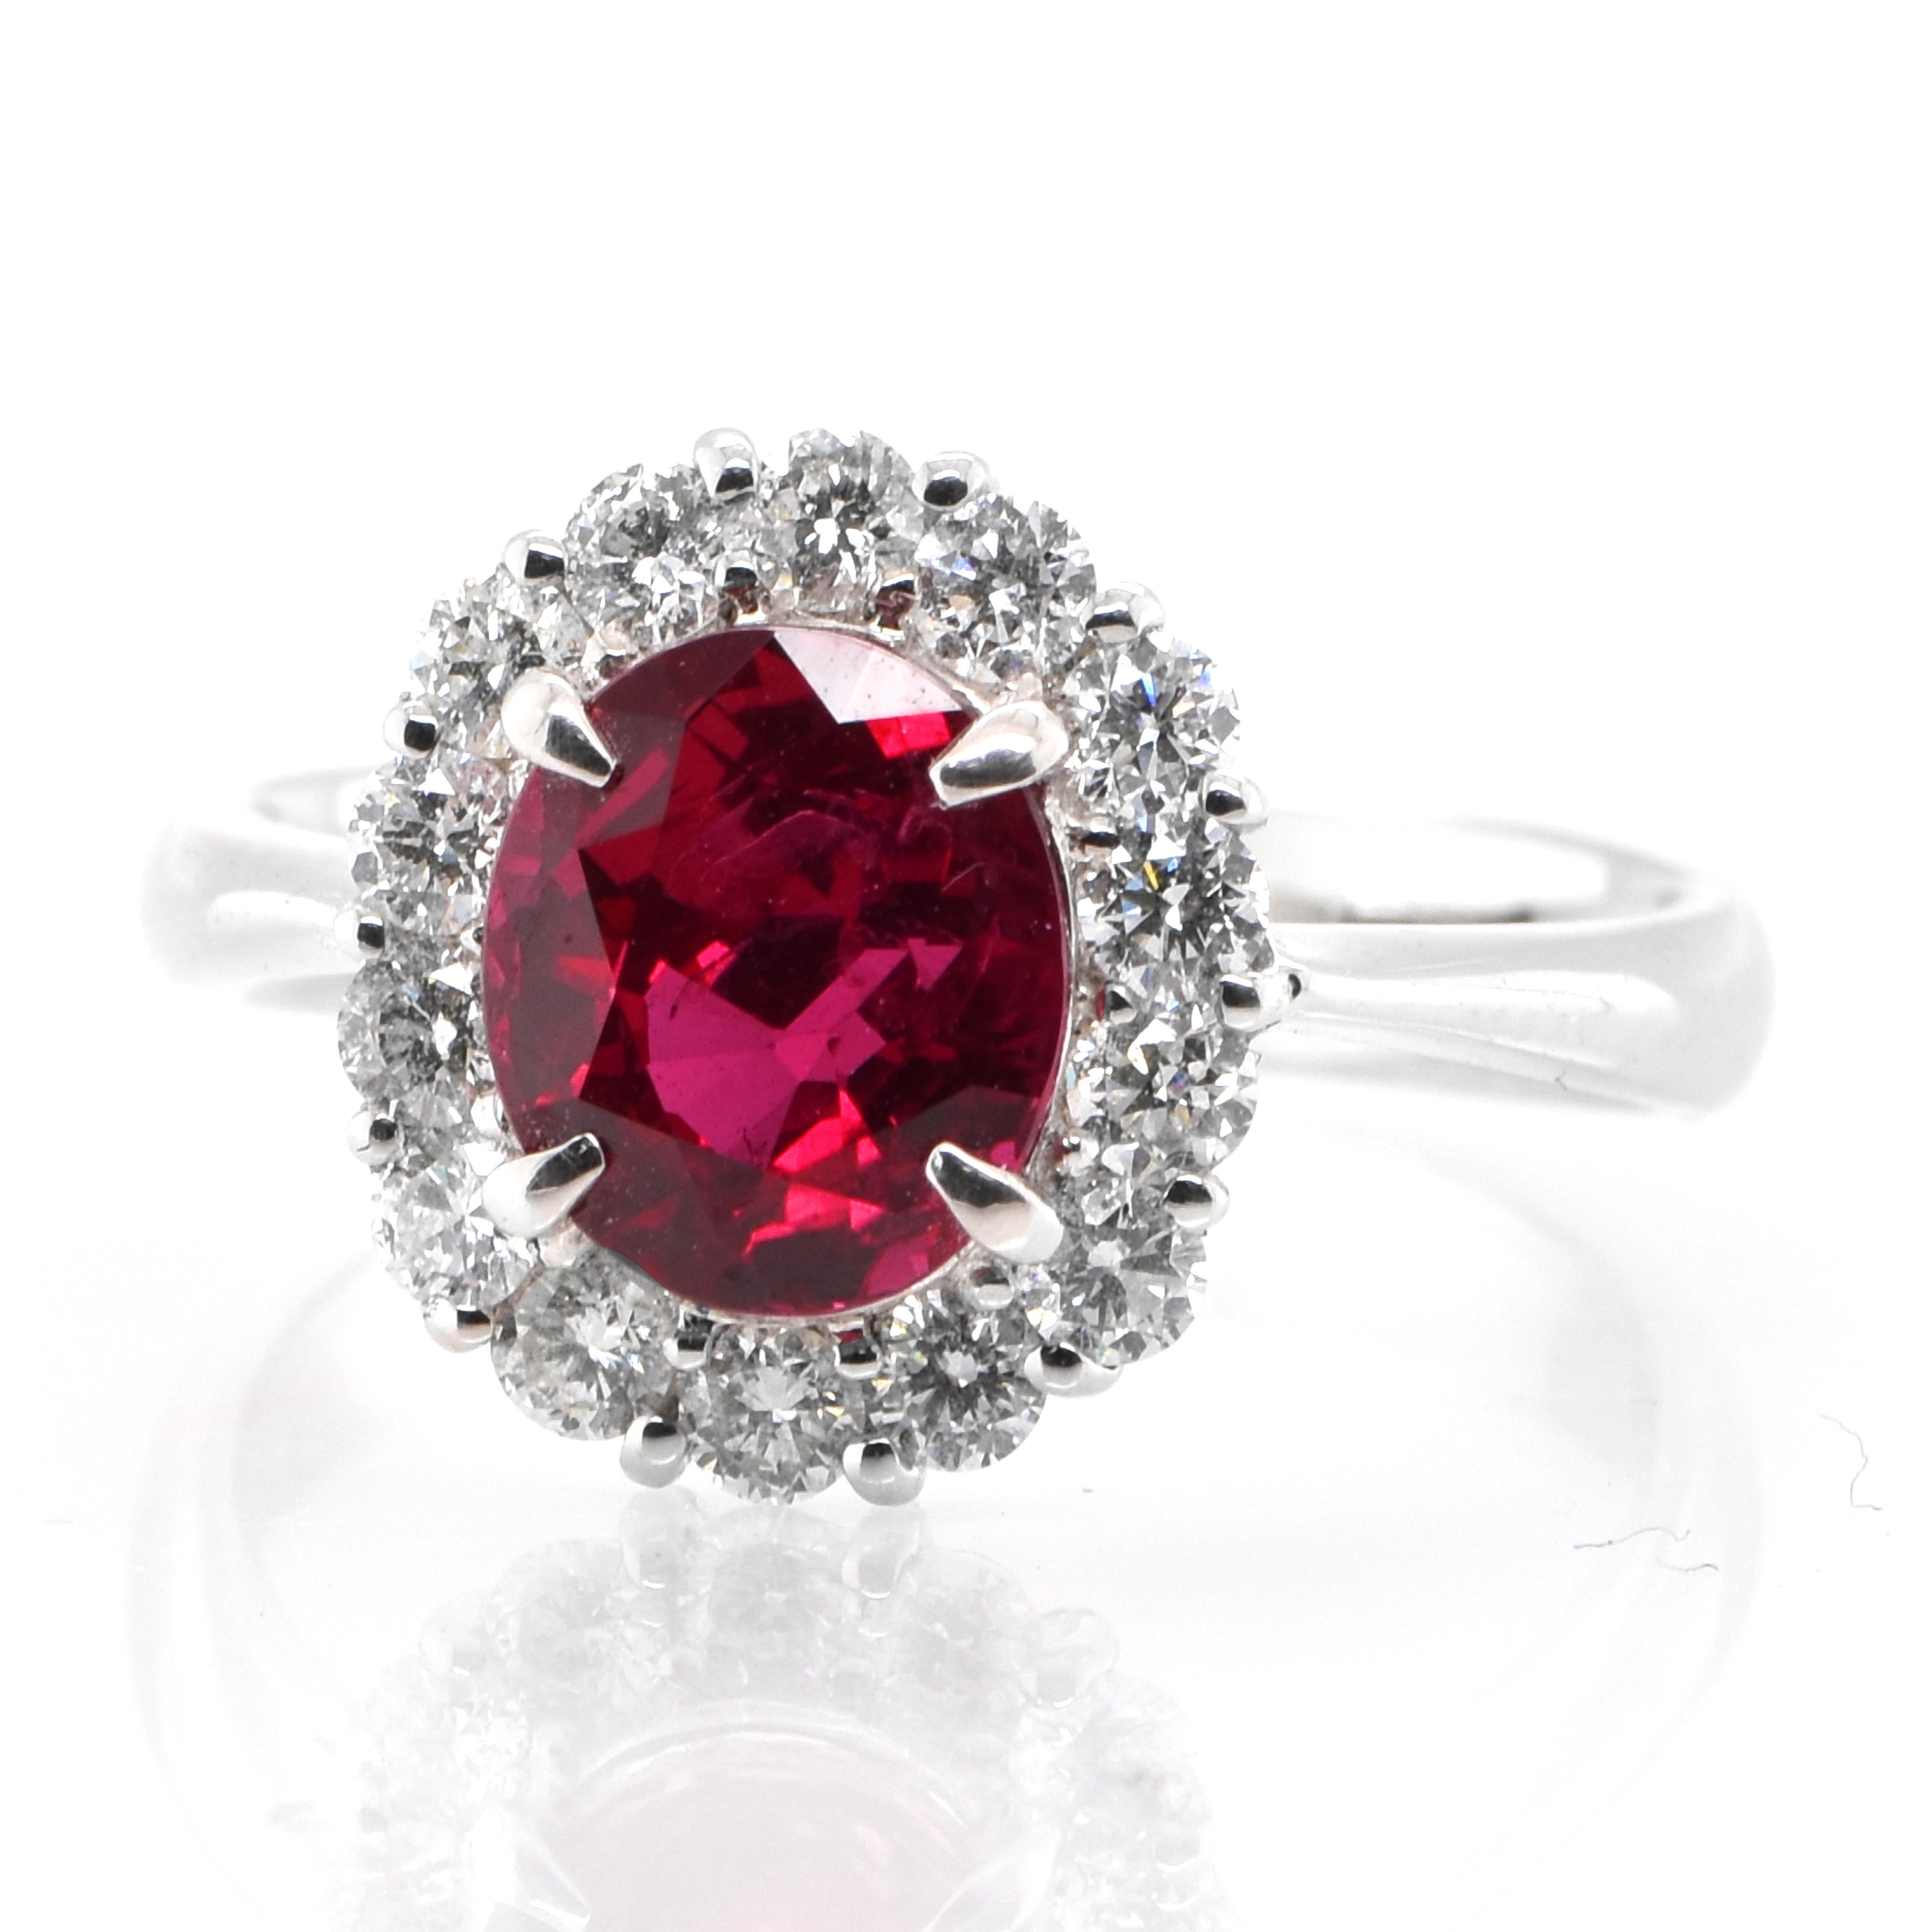 A beautiful ring set in Platinum featuring a GRS Certified 2.33 Carat Natural Vivid Red, Thailand Ruby and 0.61 Carat Diamonds. Rubies are referred to as 